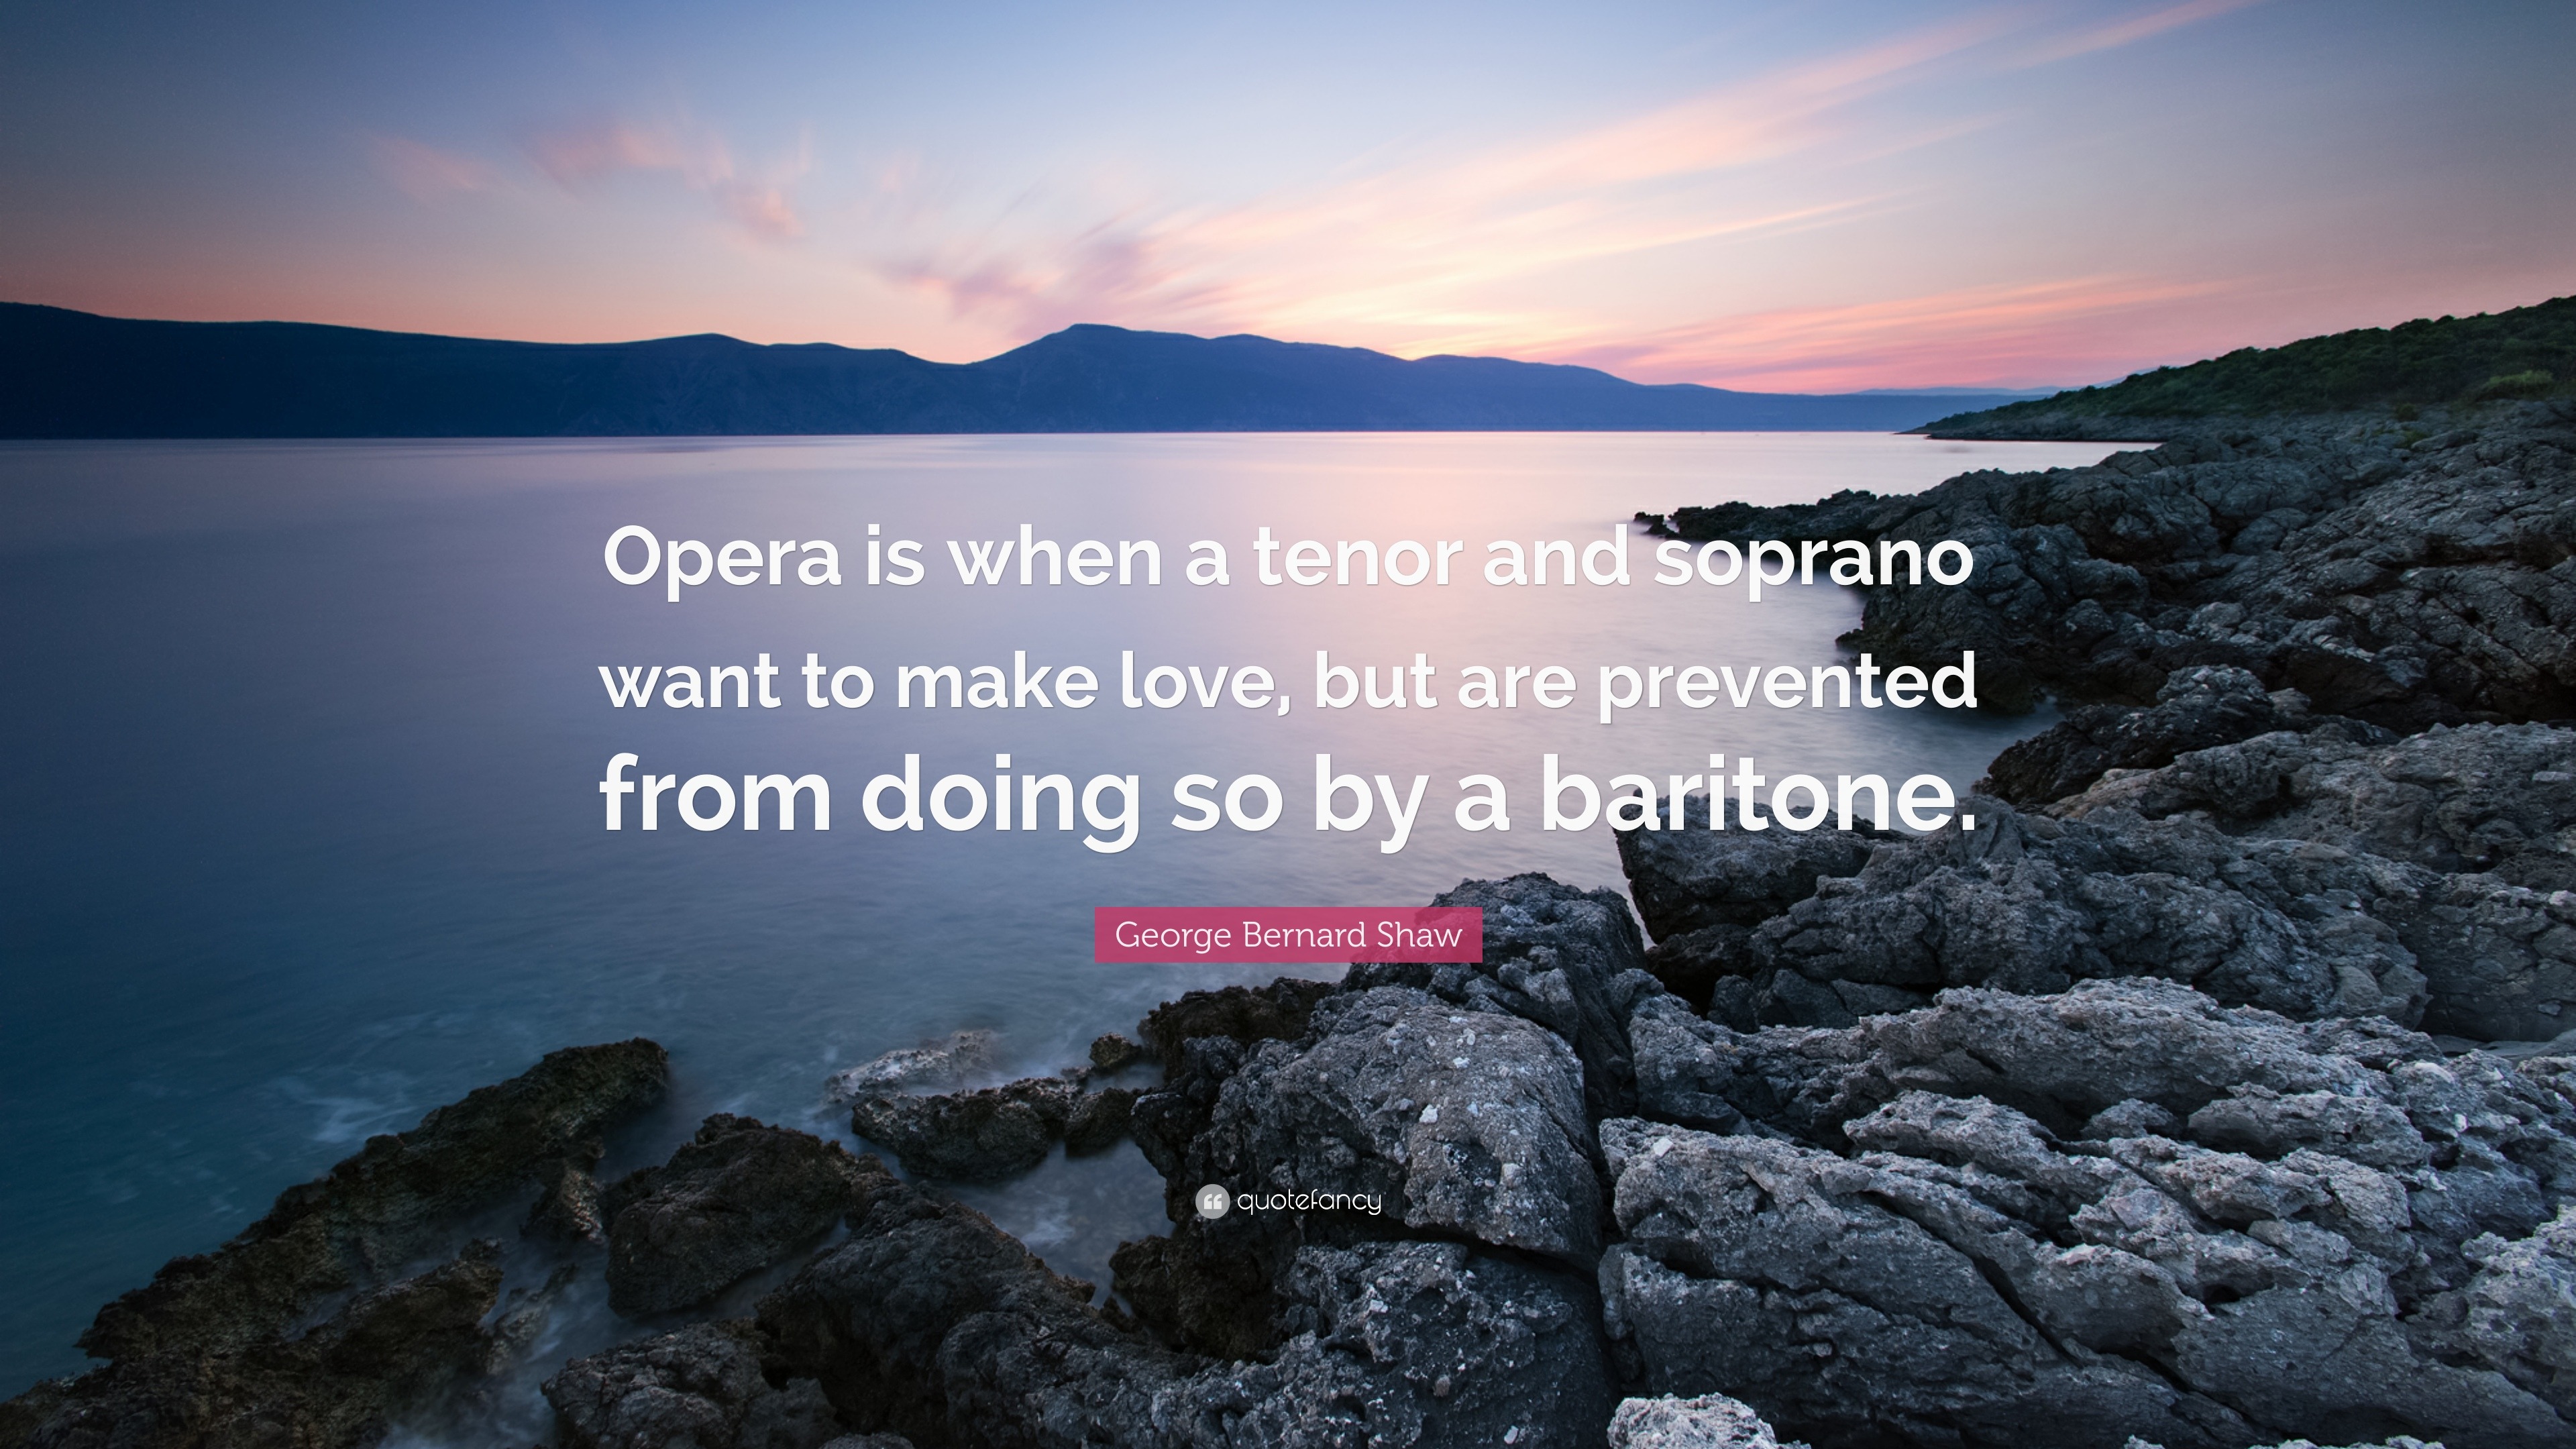 George Bernard Shaw Quote “Opera is when a tenor and soprano want to make